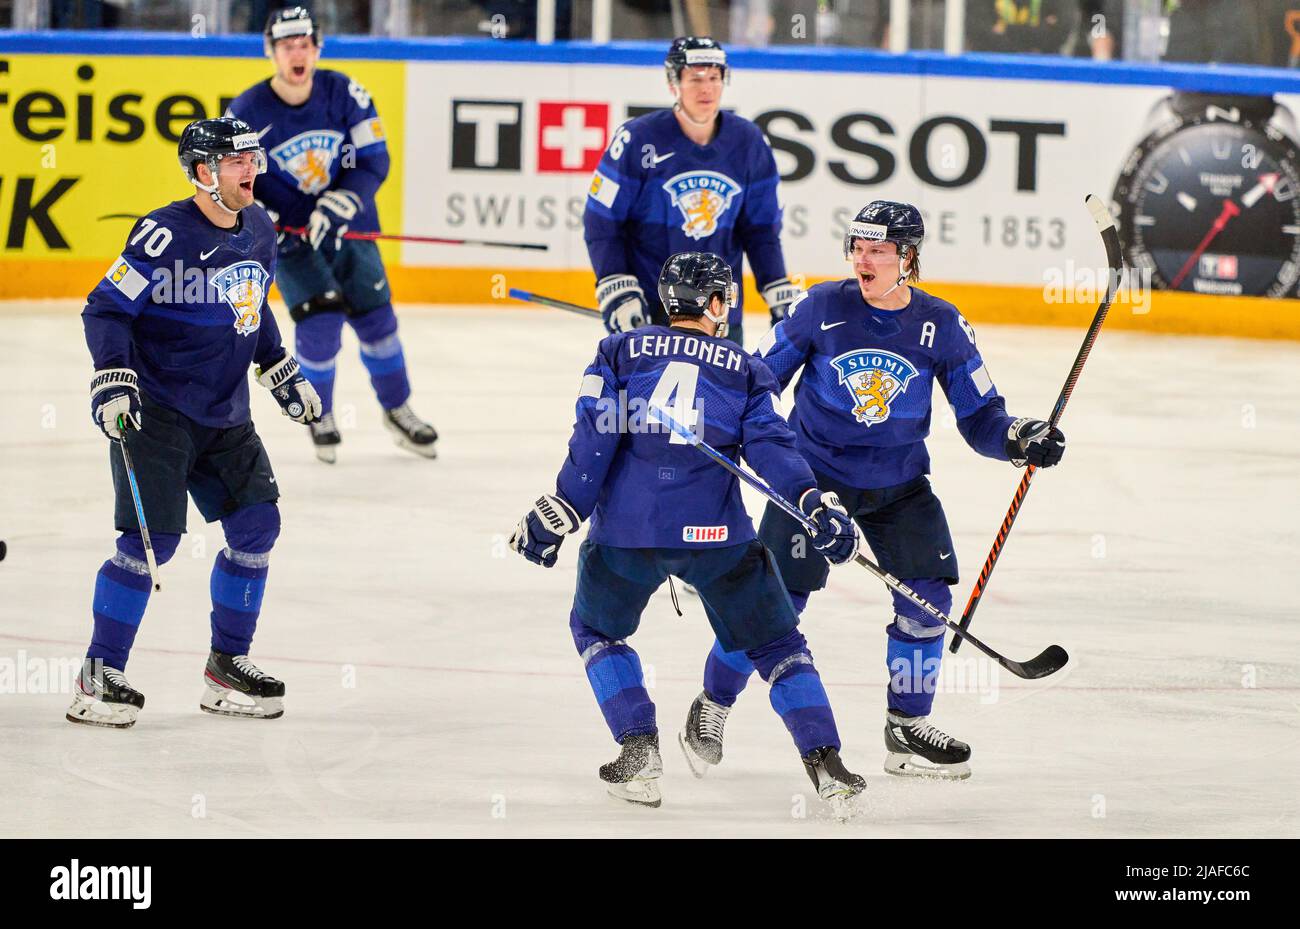 Team Finland celebrate the 2-1 of Mikael Granlund FIN Nr. 64   scores, shoots goal , Tor, Treffer, Torschuss,  in the match FINLAND - CANADA 4-3 after sudden death IIHF ICE HOCKEY WORLD CHAMPIONSHIP final in Tampere, Finland, May 29, 2022,  Season 2021/2022 © Peter Schatz / Alamy Live News Stock Photo